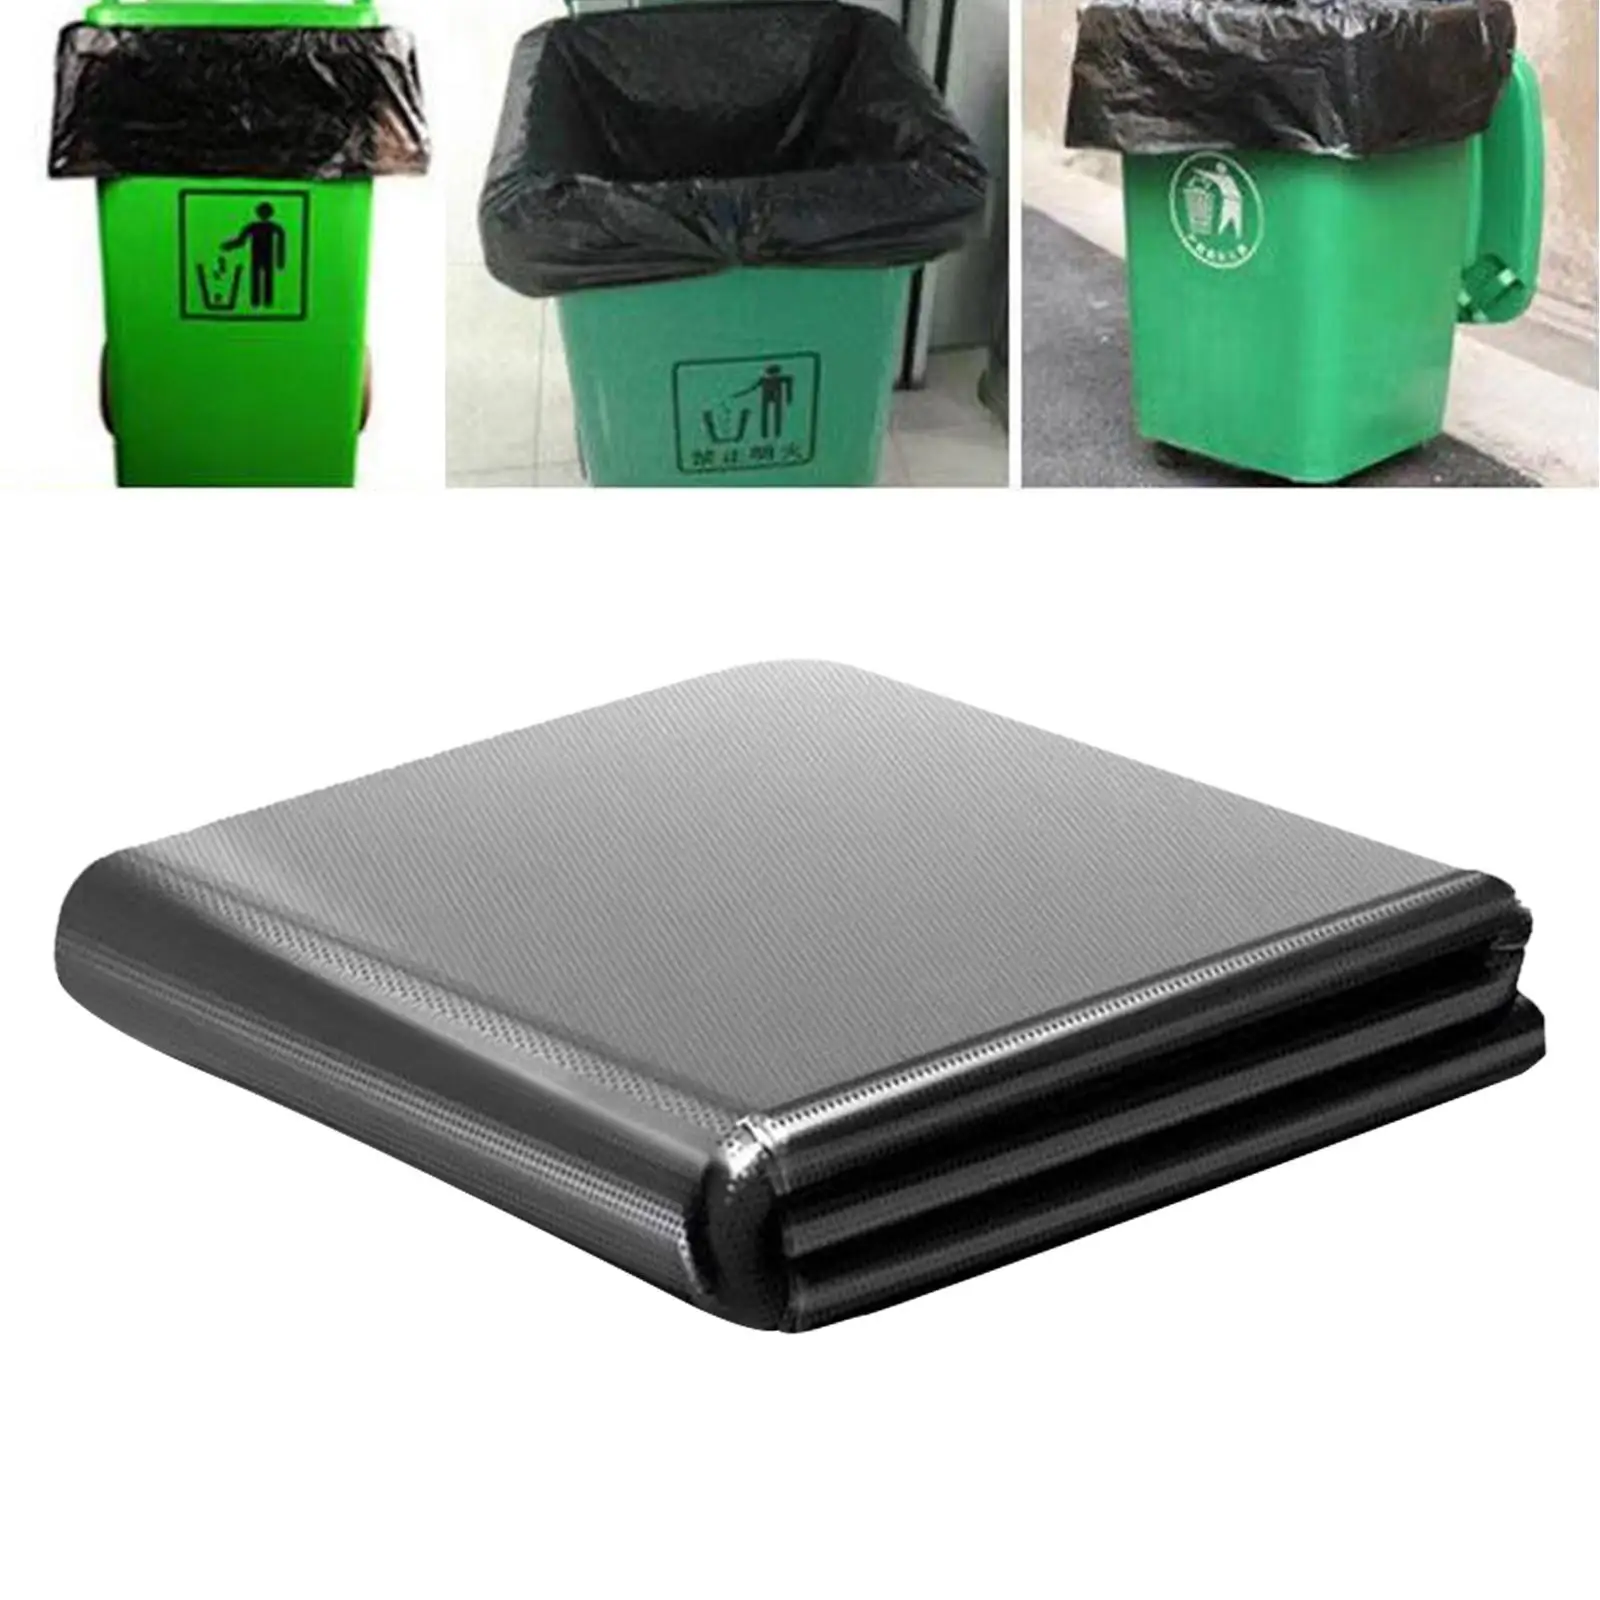 50Pcs Garbage Bags Recycling Bags Bin Liners for Household Office Commercial